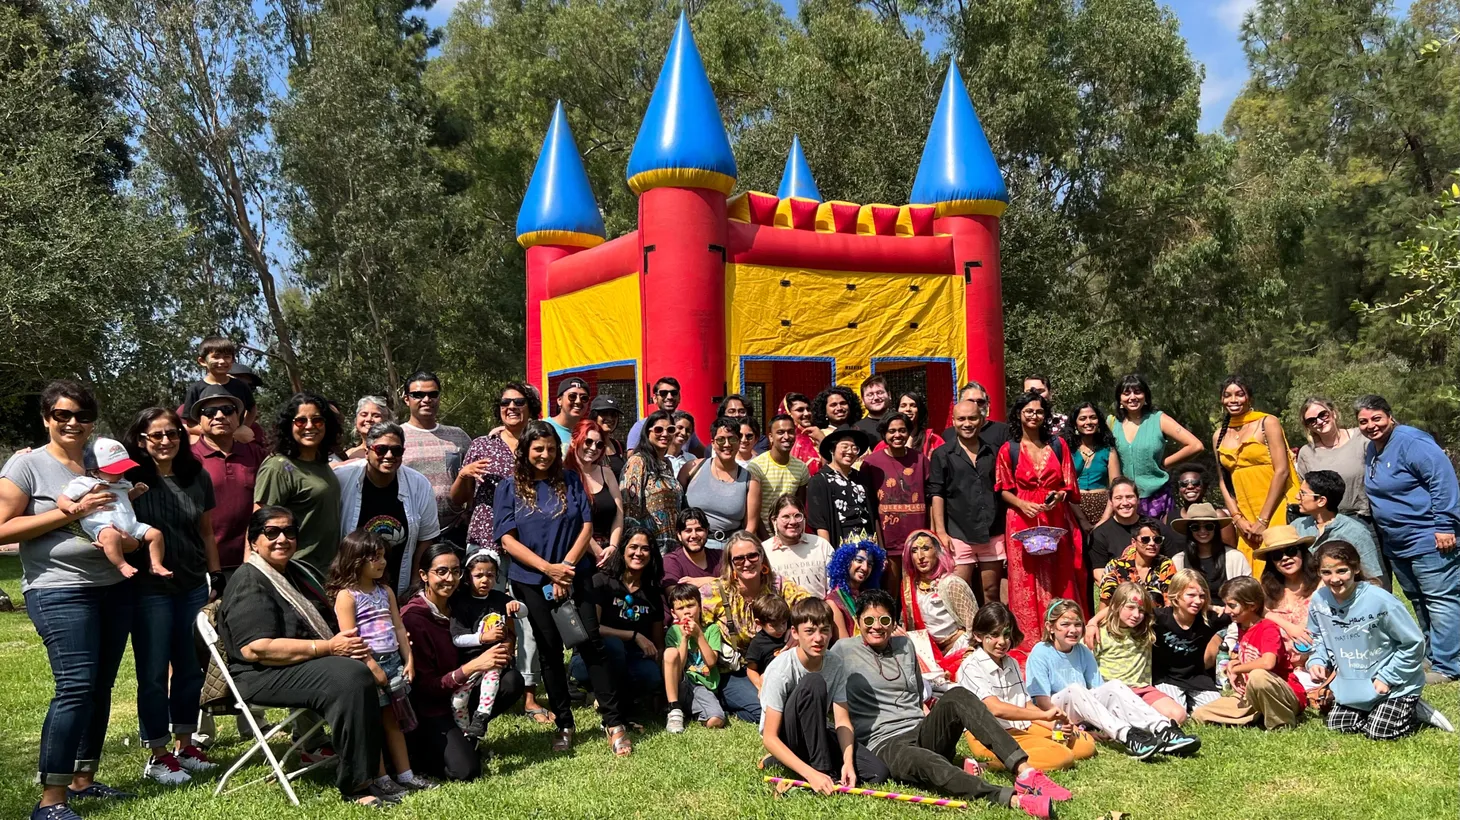 More than 80 people gathered in Griffith Park for Satrang Family Day, a celebration and safe space for South Asian and queer families.